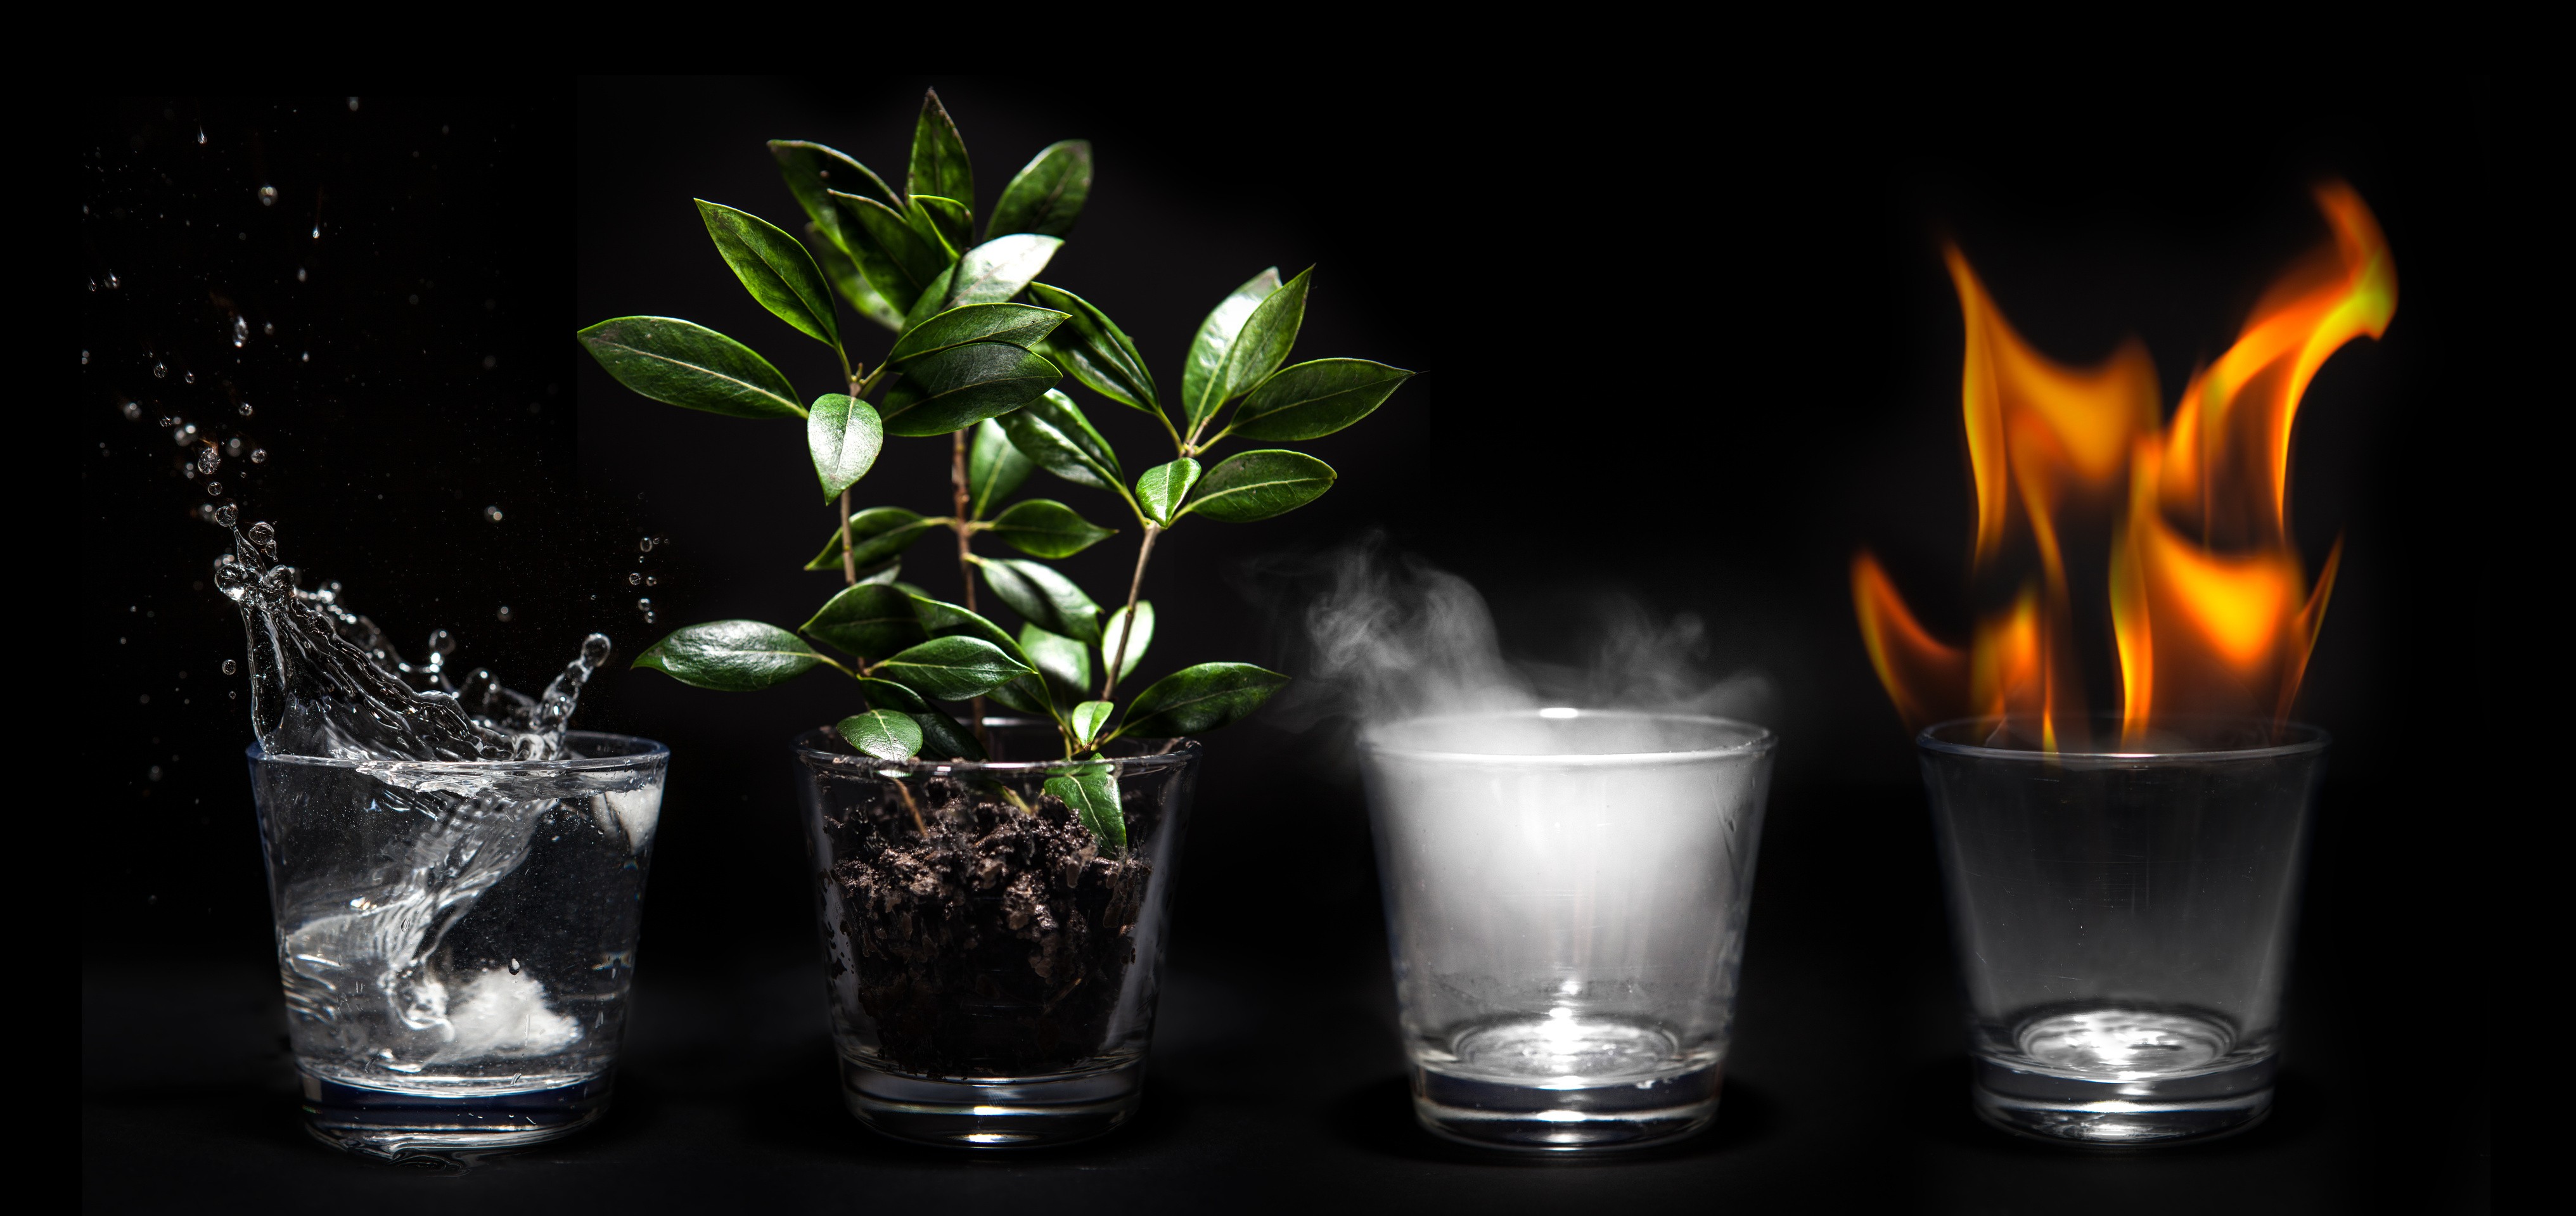 General 4065x1919 artwork plants fire leaves black background simple background water